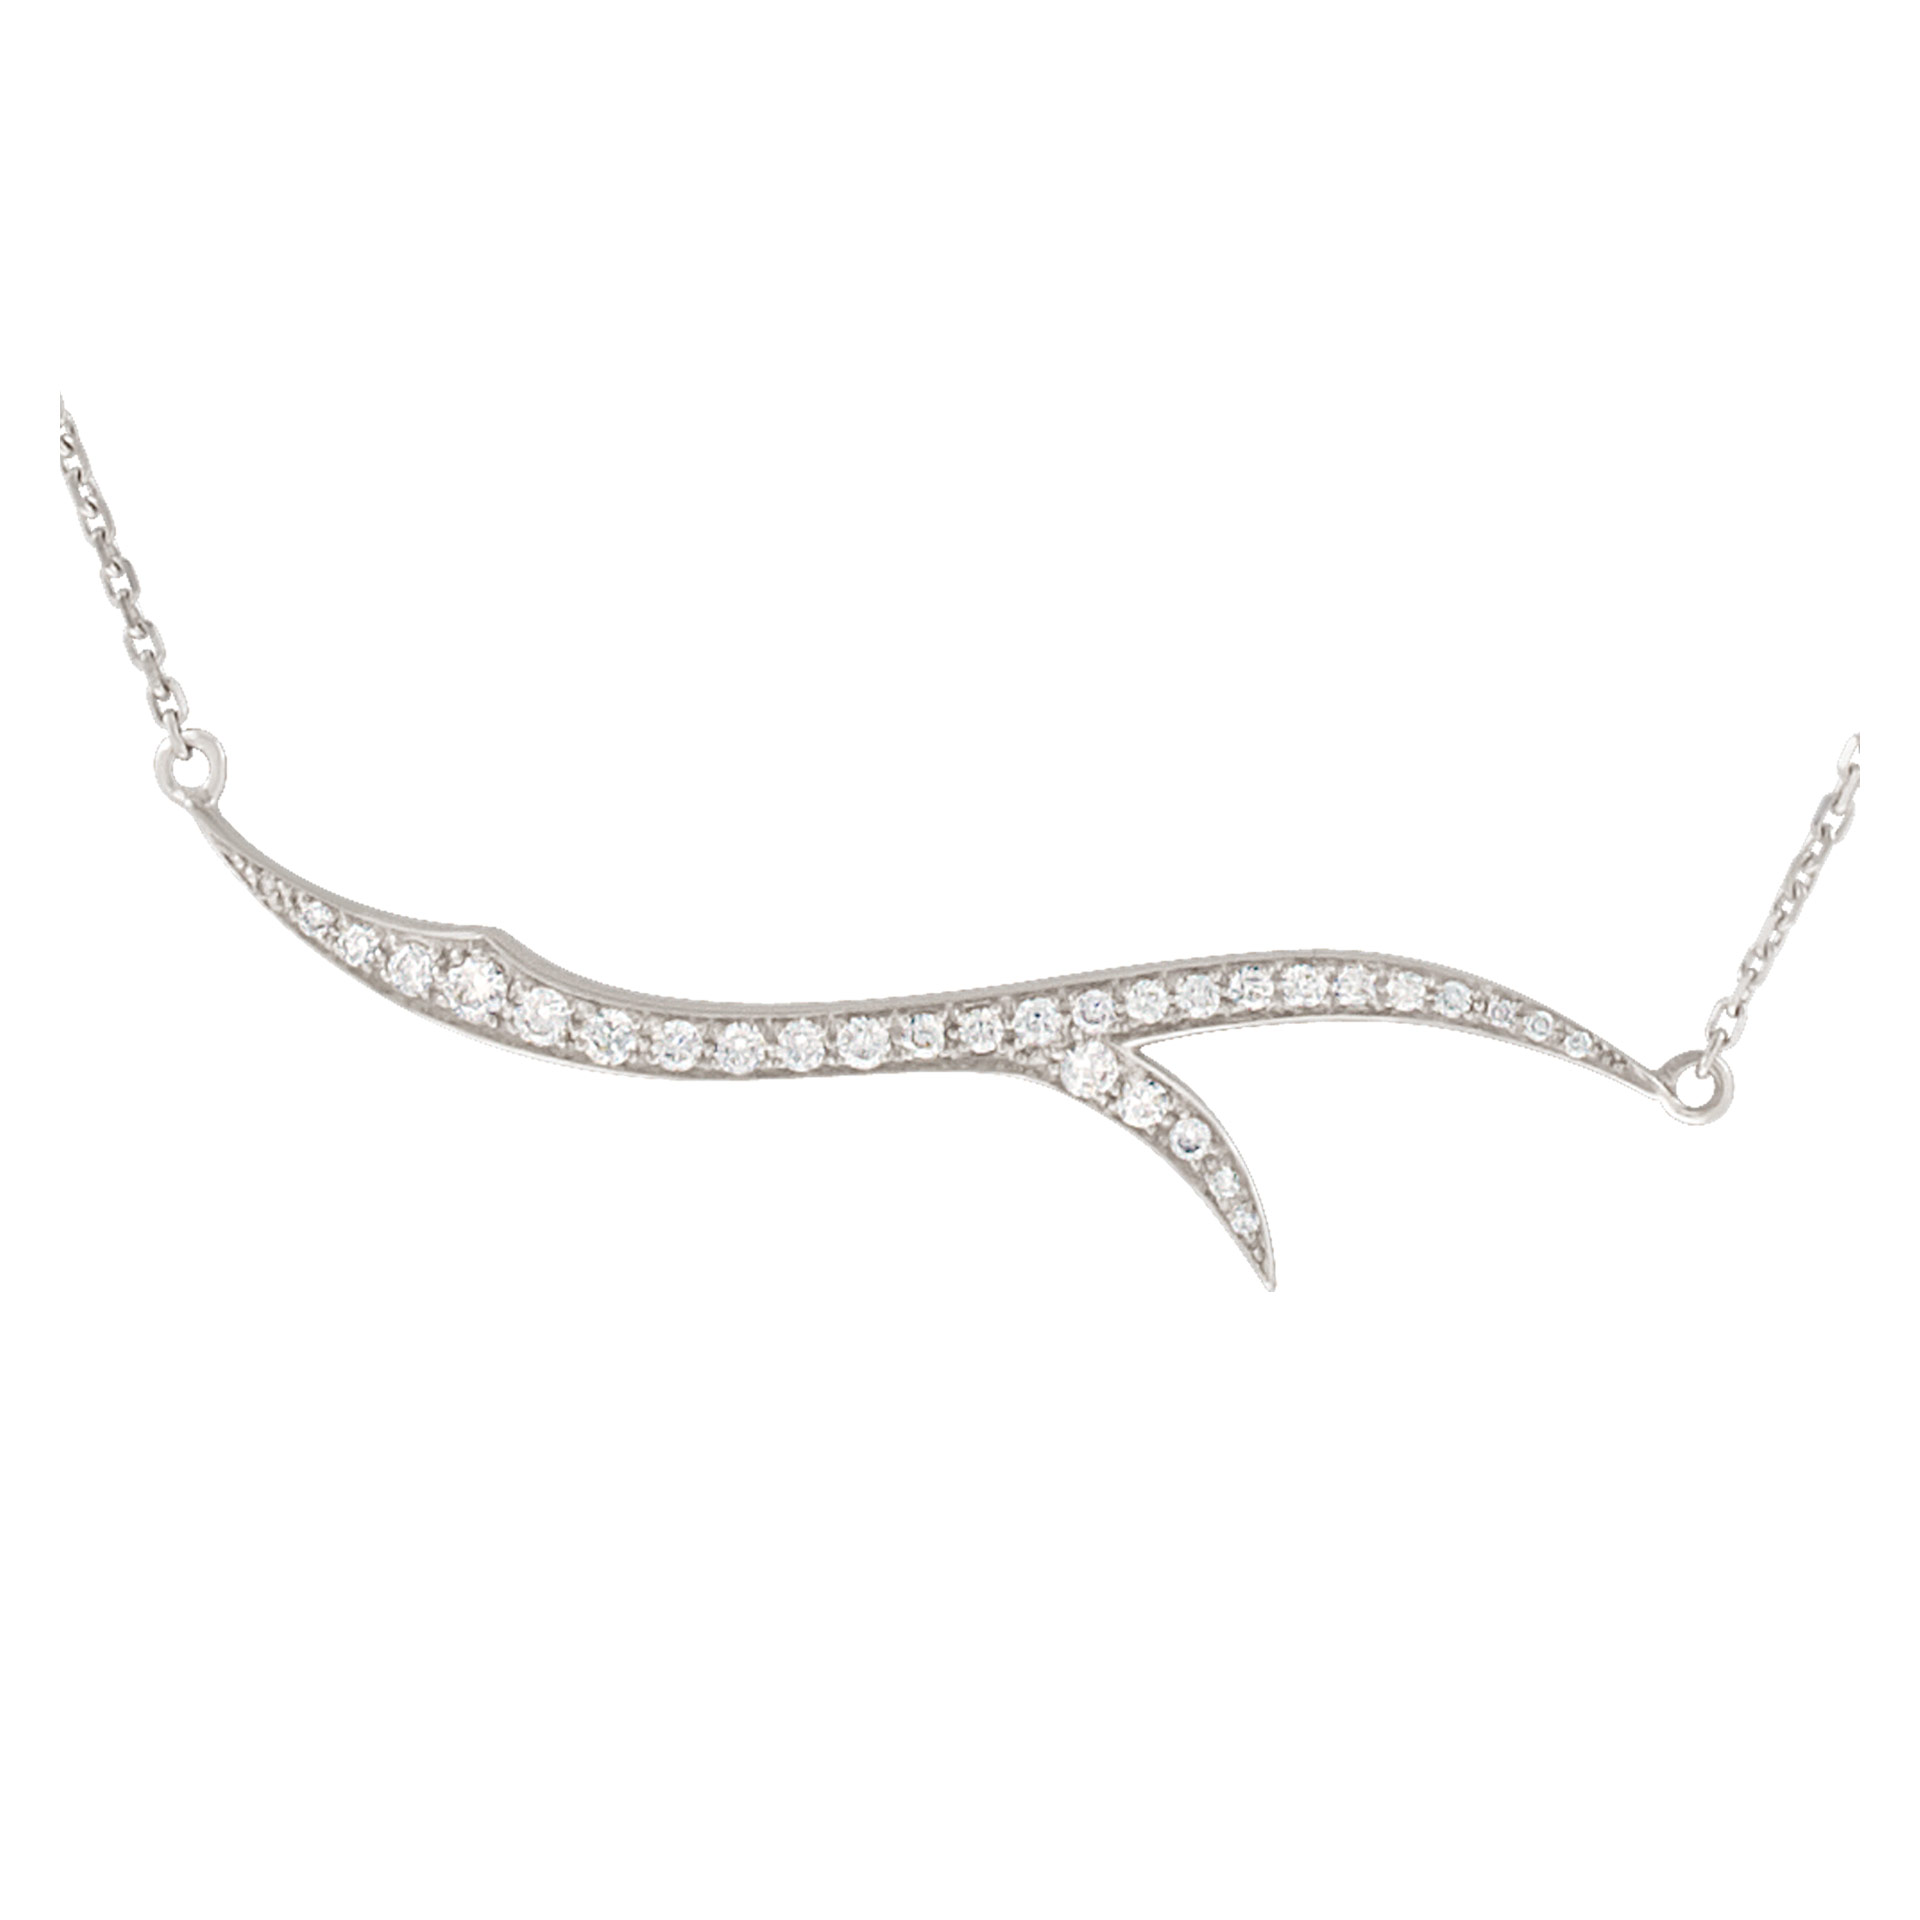 Stephen Webster 18k white gold necklace with diamonds image 1